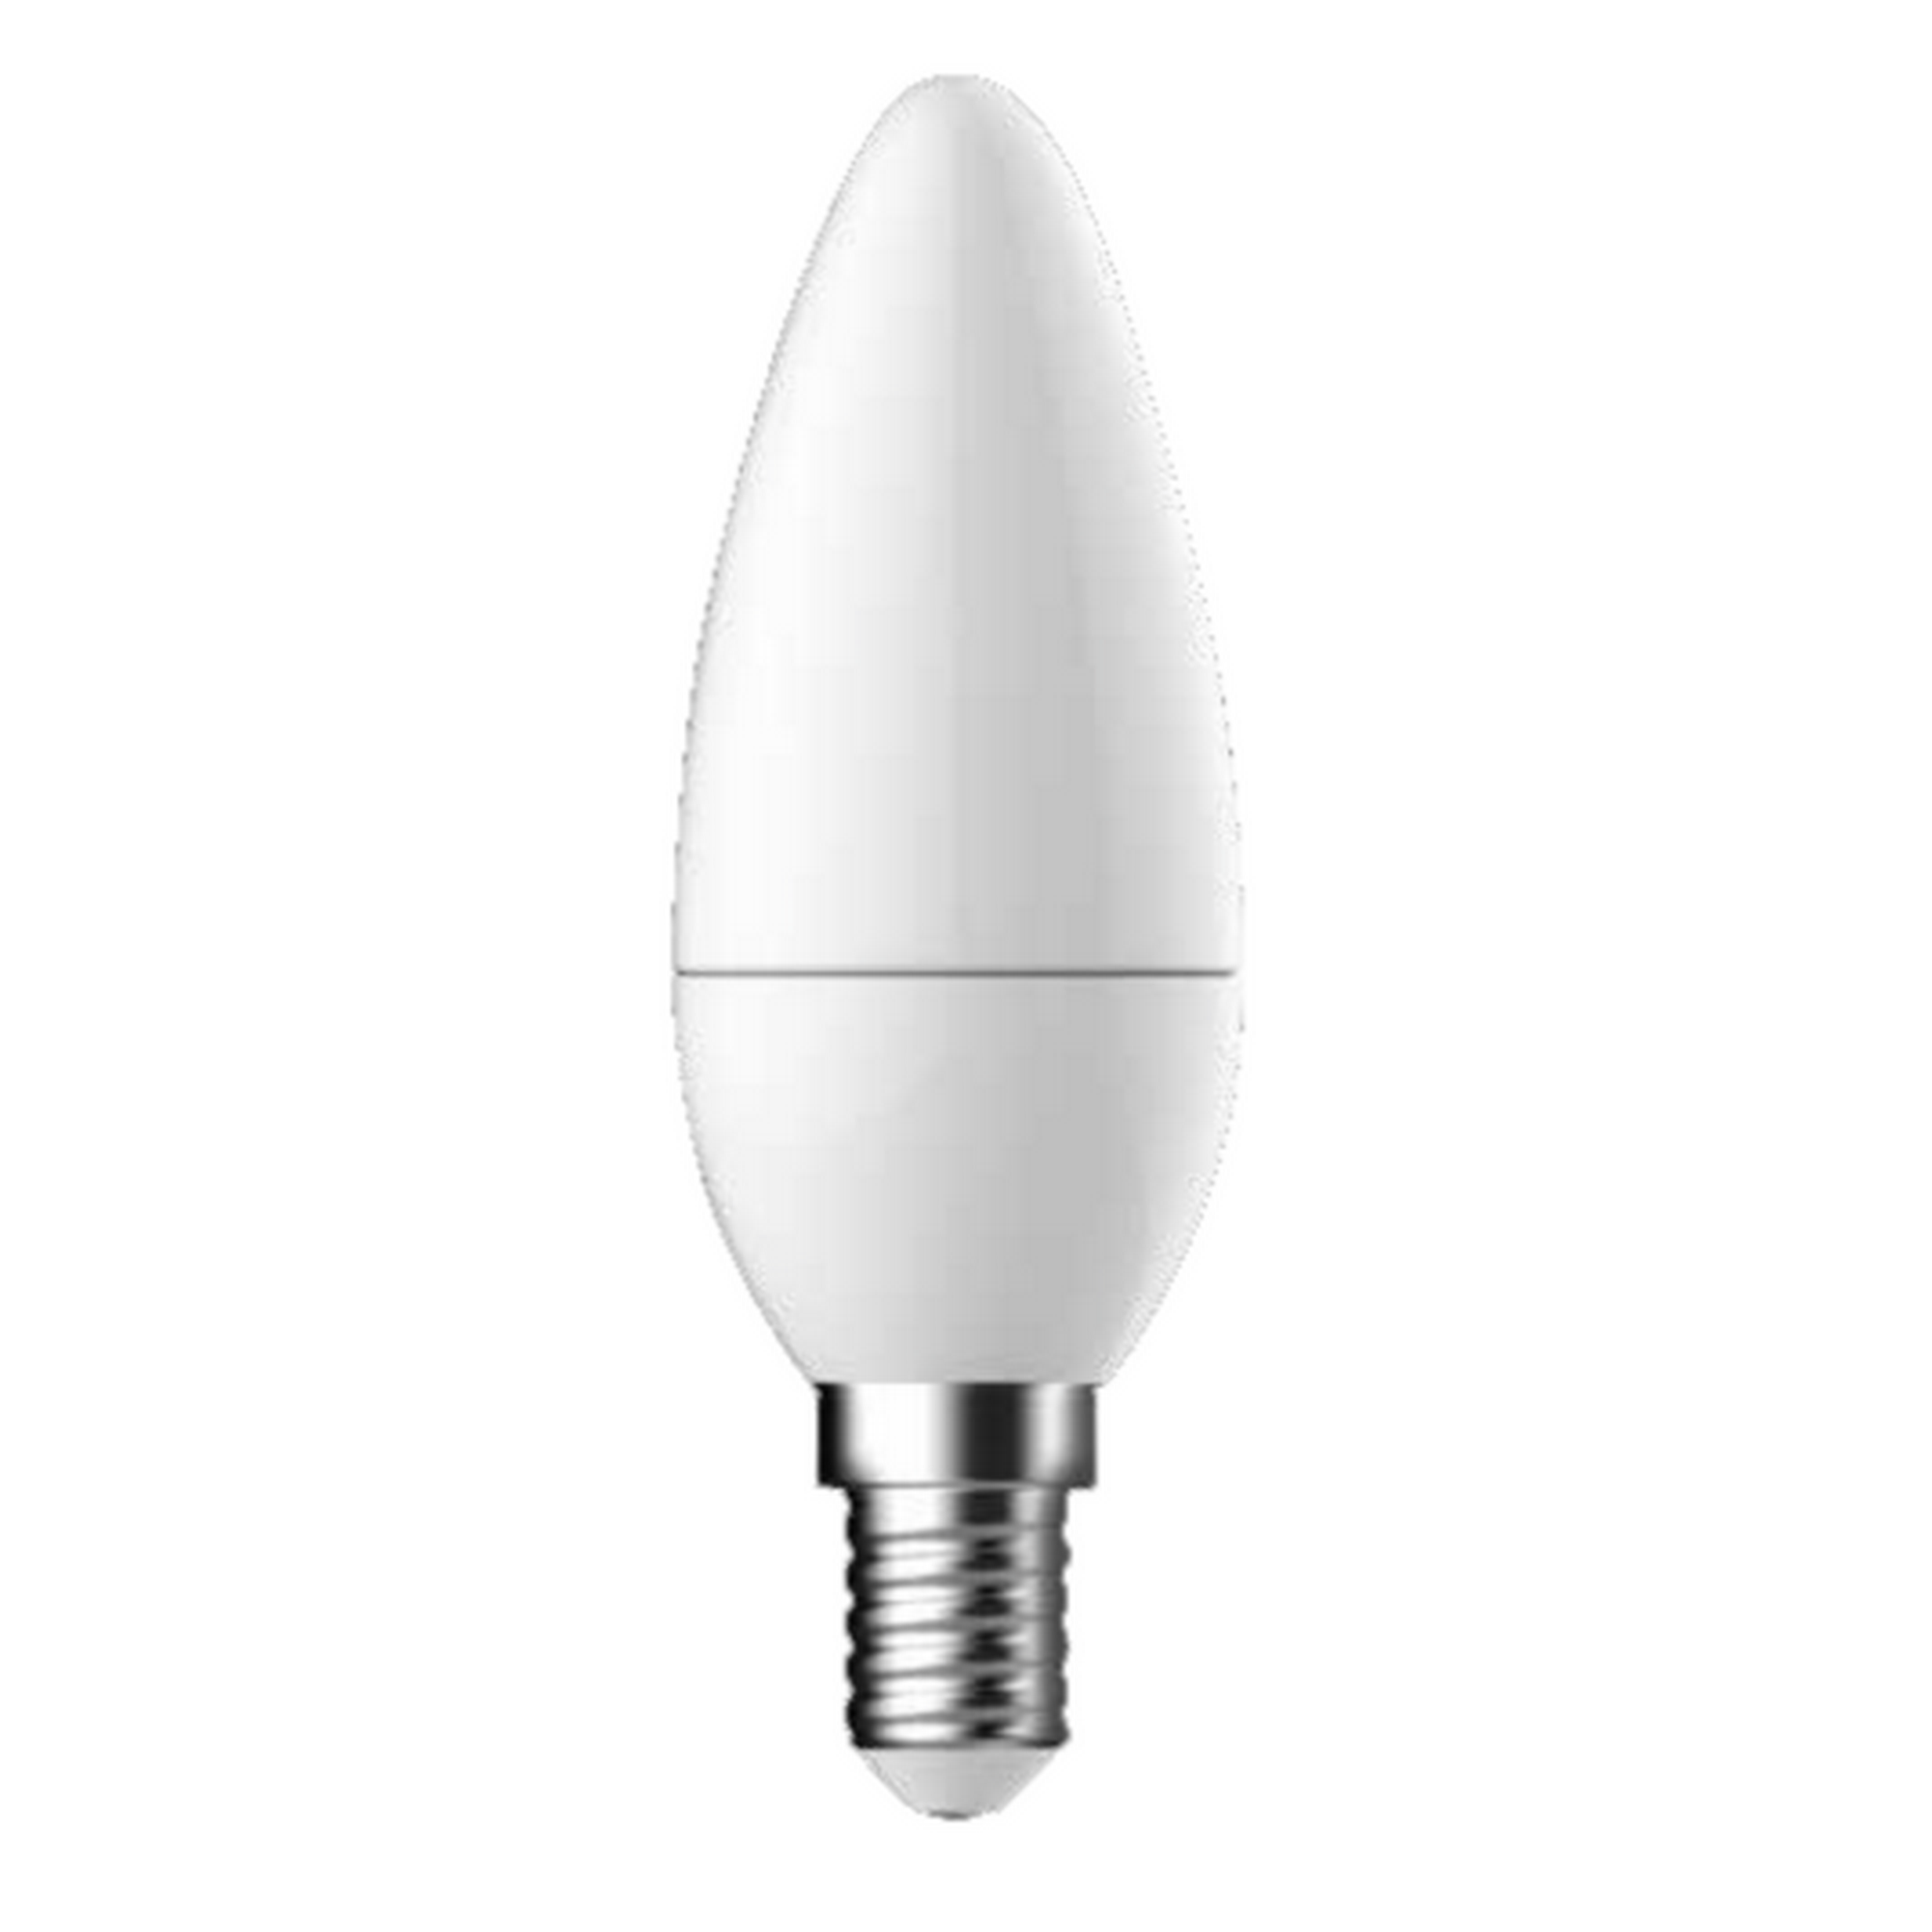 LED-Kerzenlampe E14 1,8 W 250 lm + product picture